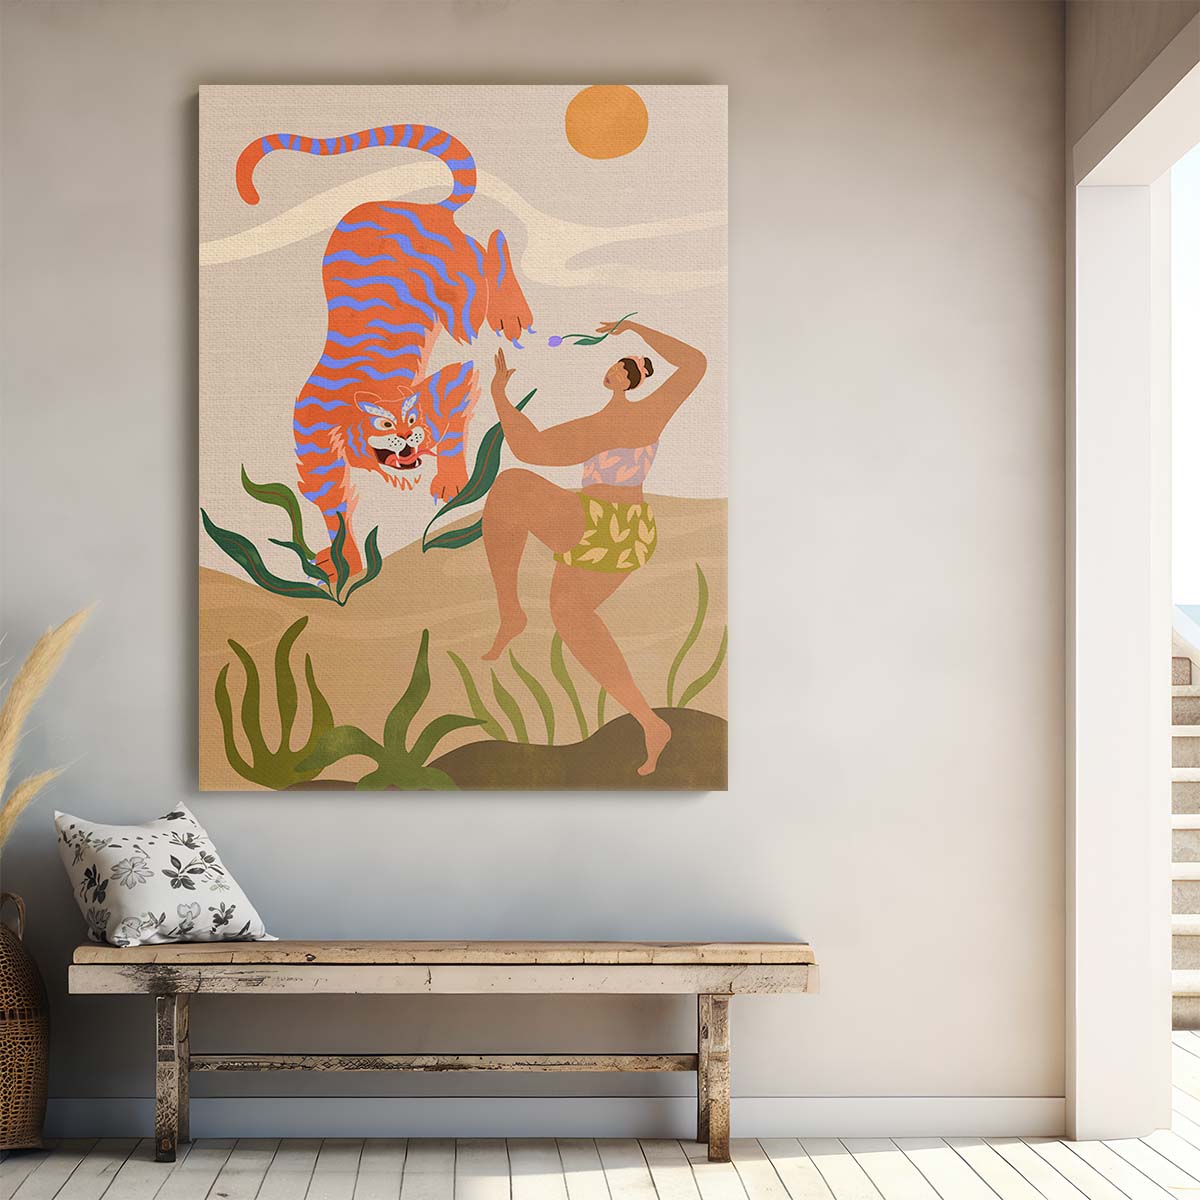 Colorful Dancing Woman with Tiger Illustration, Botanical Boho Art by Luxuriance Designs, made in USA